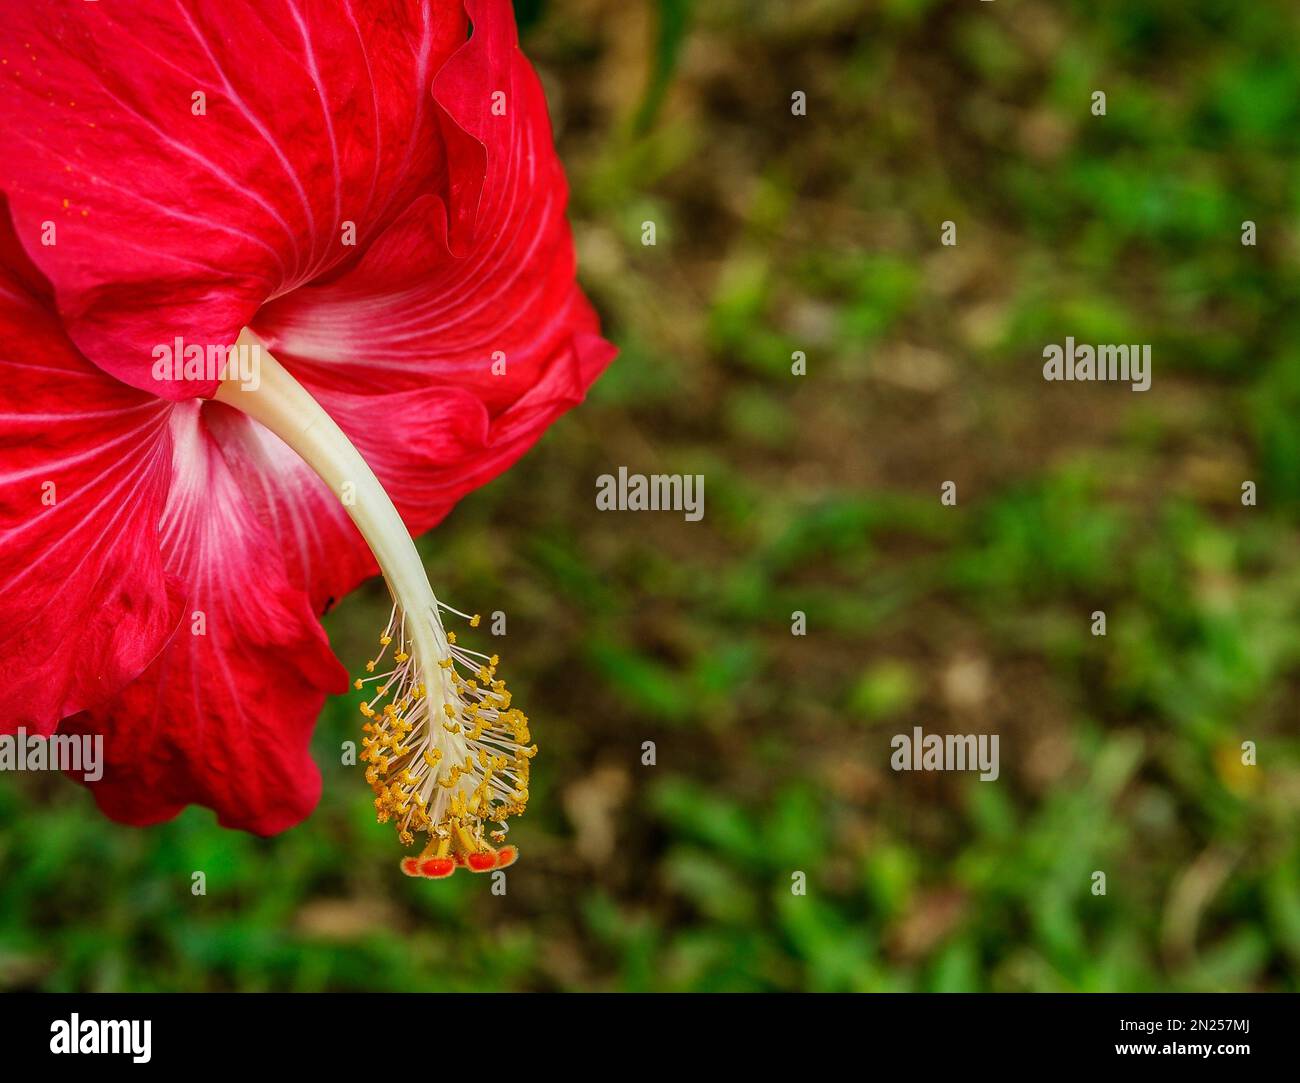 Closeup brilliant red hibiscus flower with stamen and pistil Stock Photo